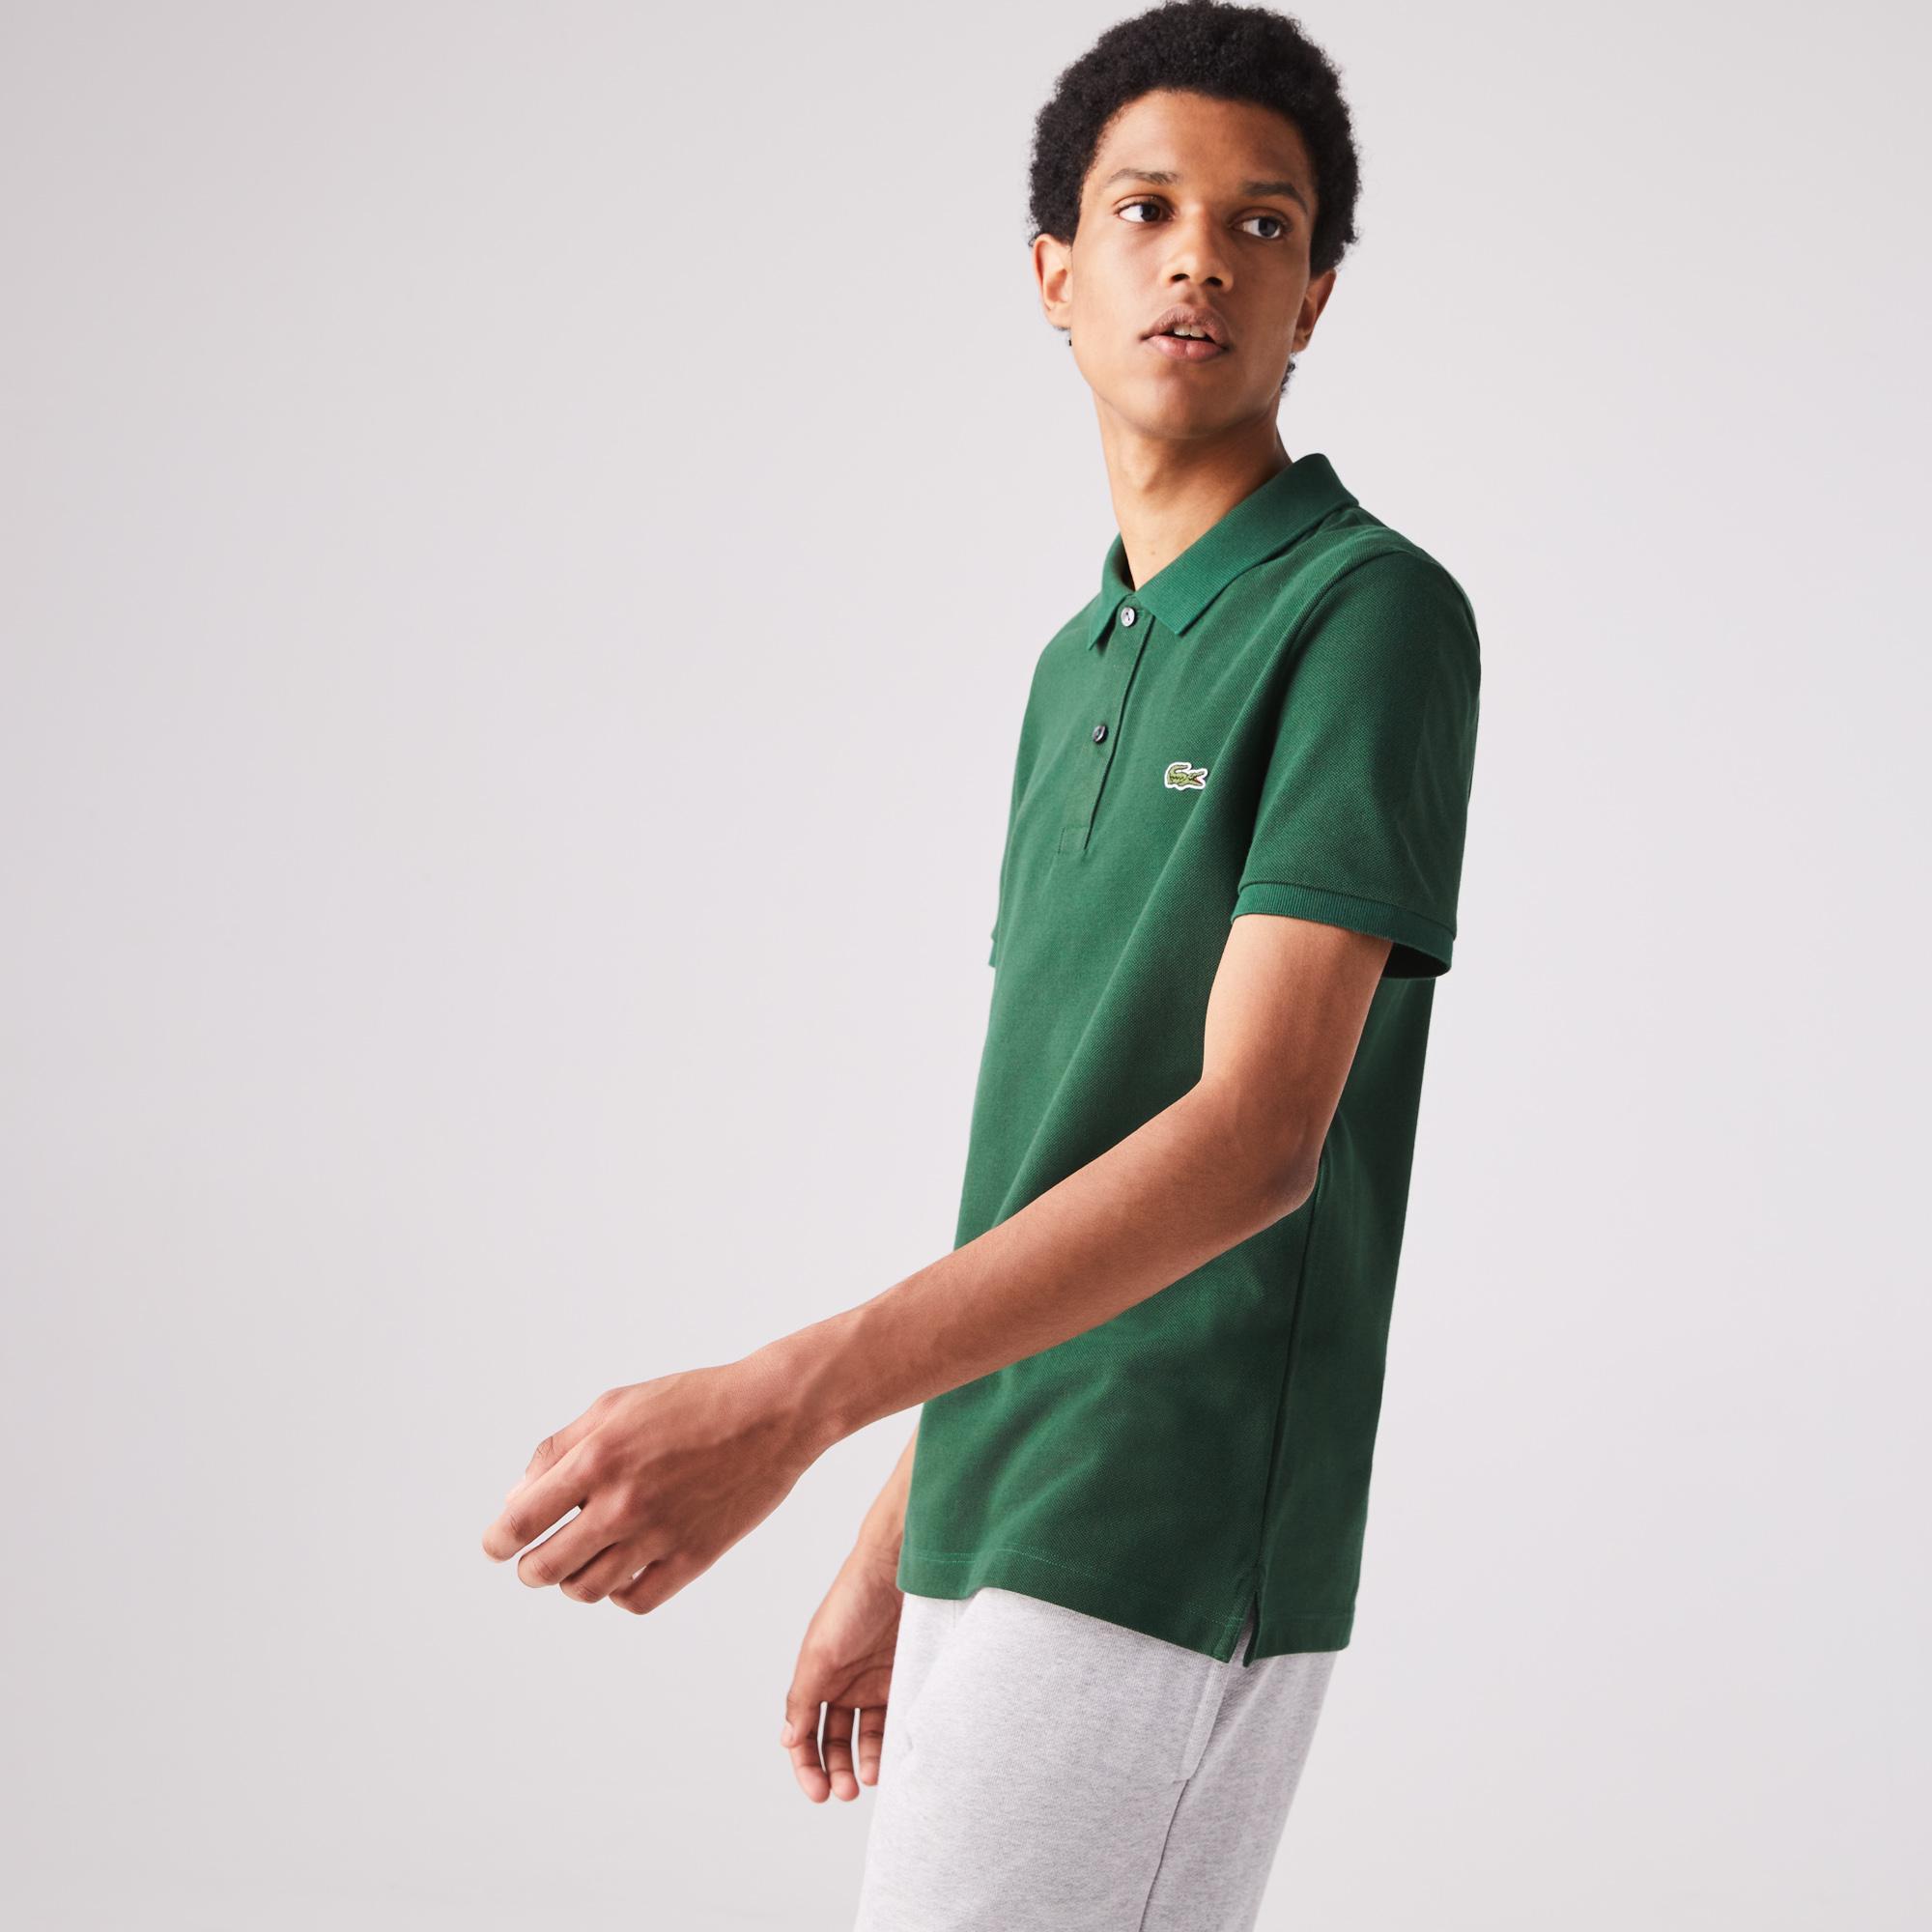 Lacoste Men's shirt polo Slim Fit  from a fine peak